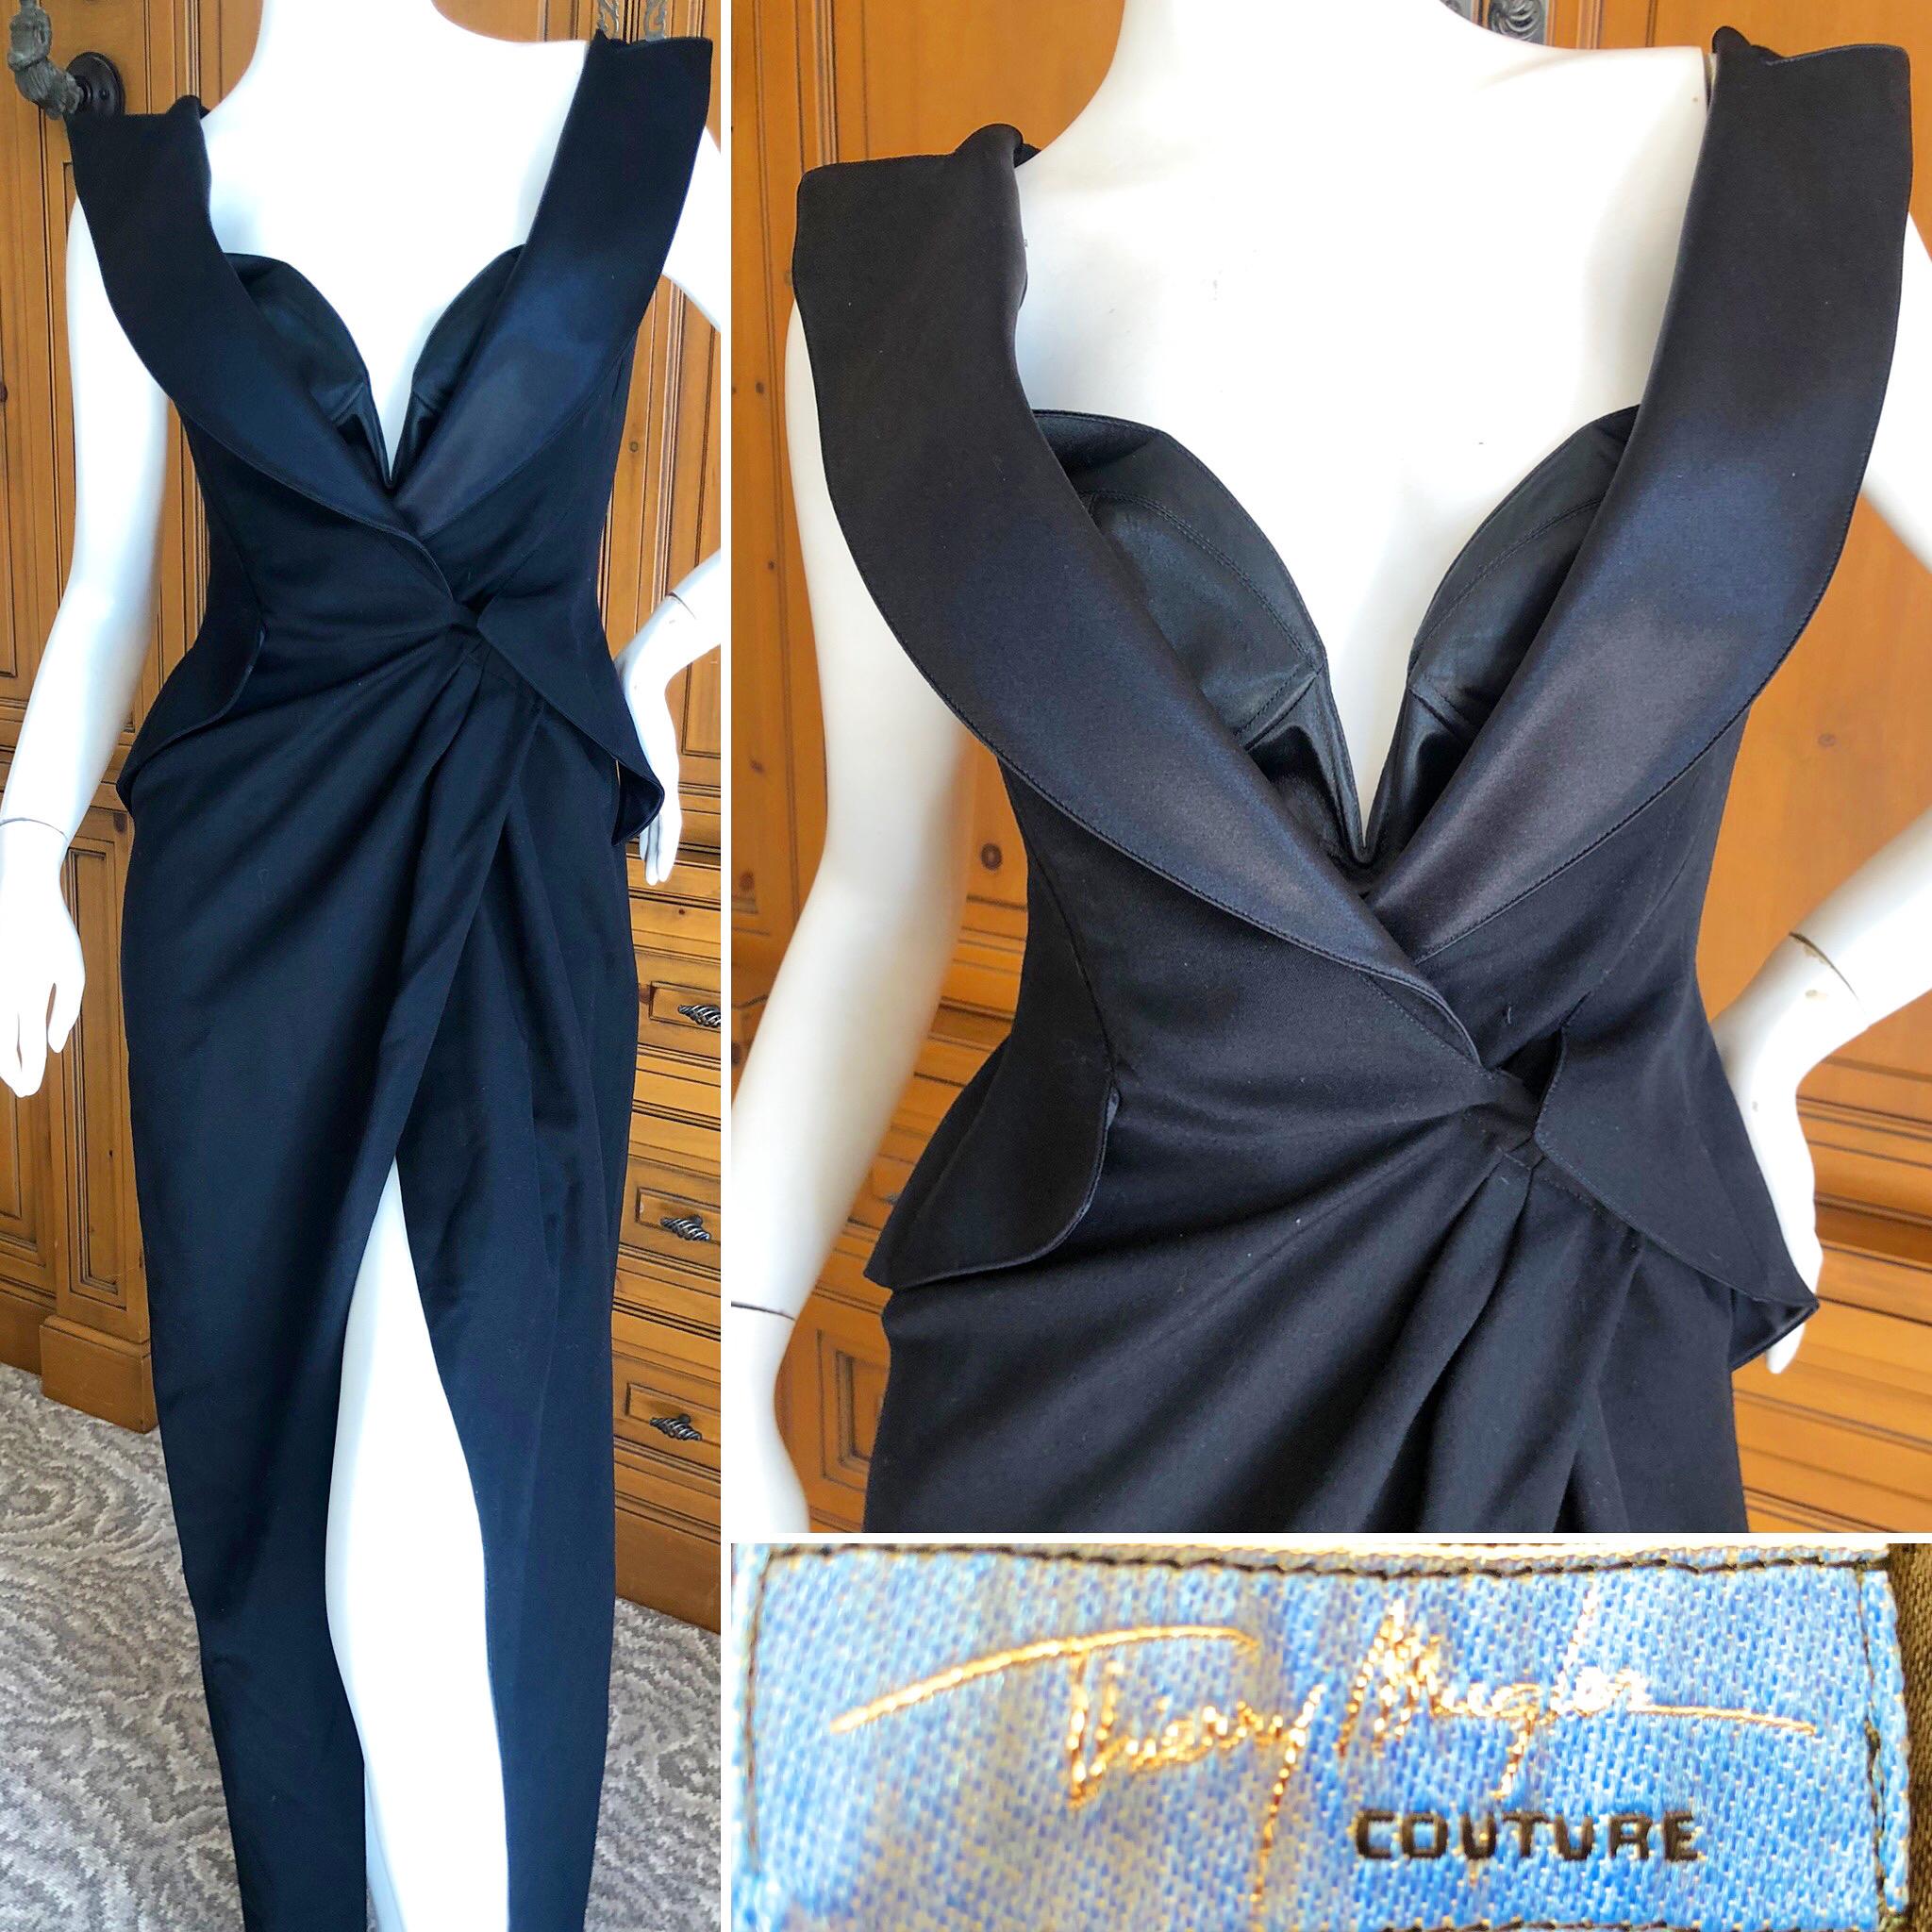 Thierry Mugler Couture 1980's Black Peak Lapel Tuxedo Dress with Separate Corset.
The corset is separate and can be worn with or without.
The corset snaps in place.
Apx Size 36-38
 Bust 34